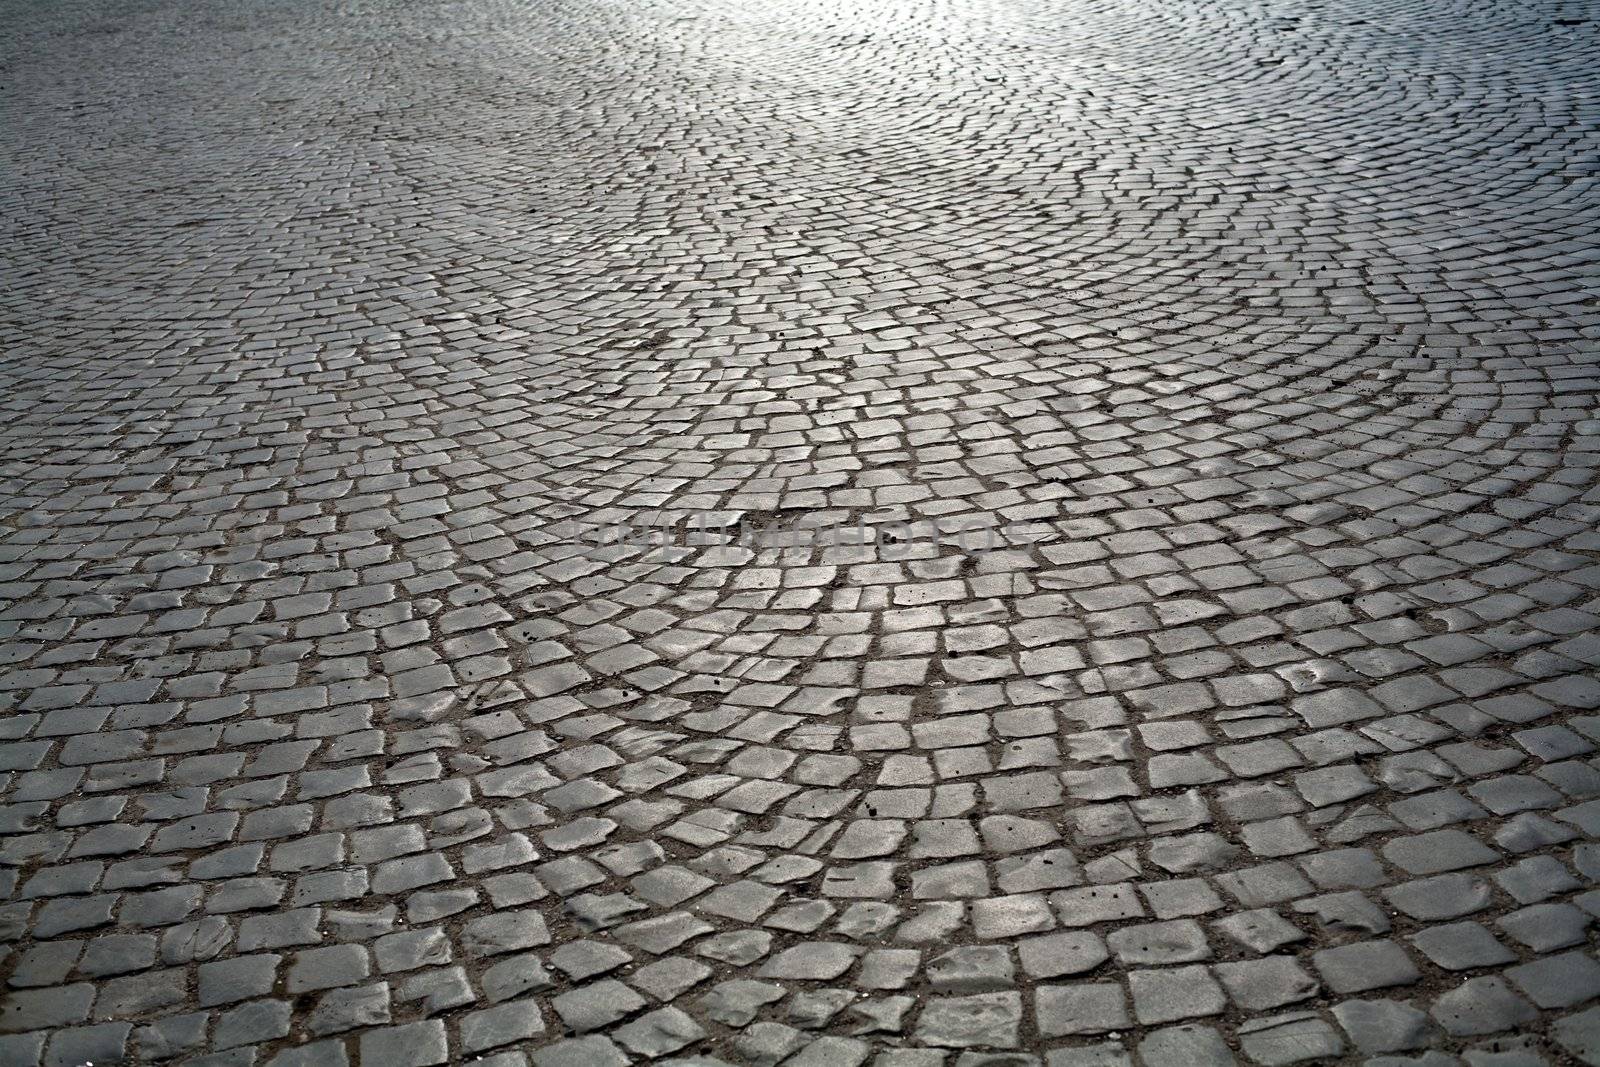 An image of a road of grey stones